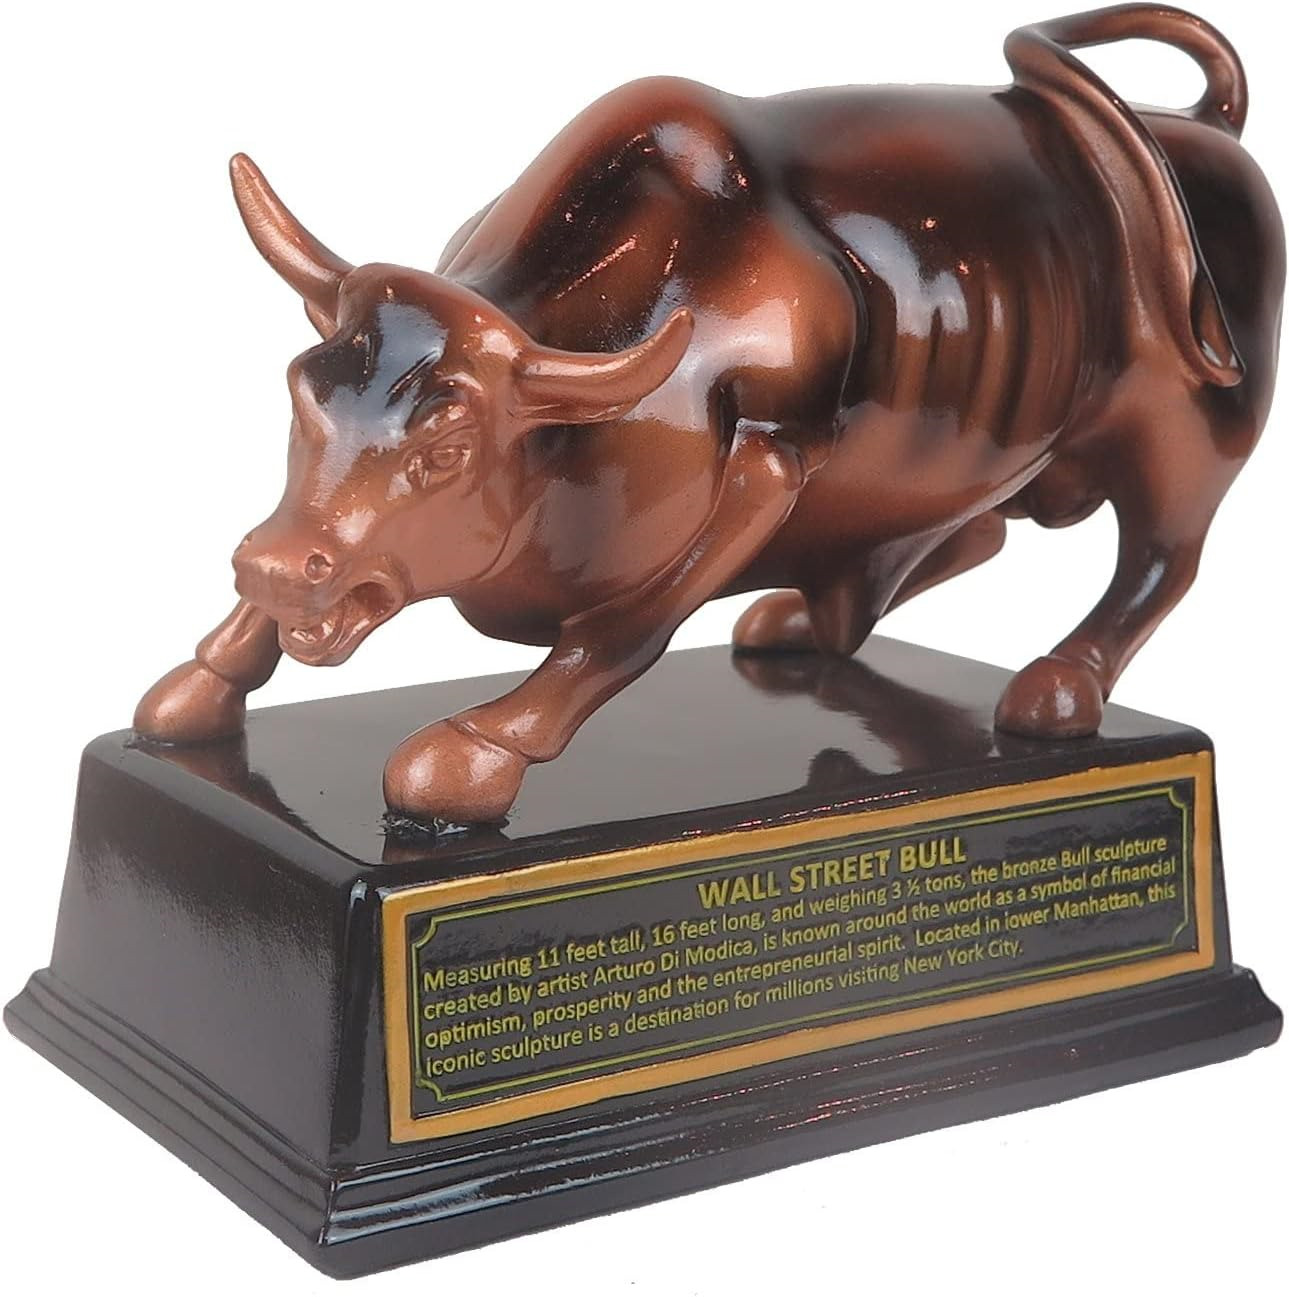 Official Licensed Bronze Wall Street Bull Stock Market NYC Figurine Statue with